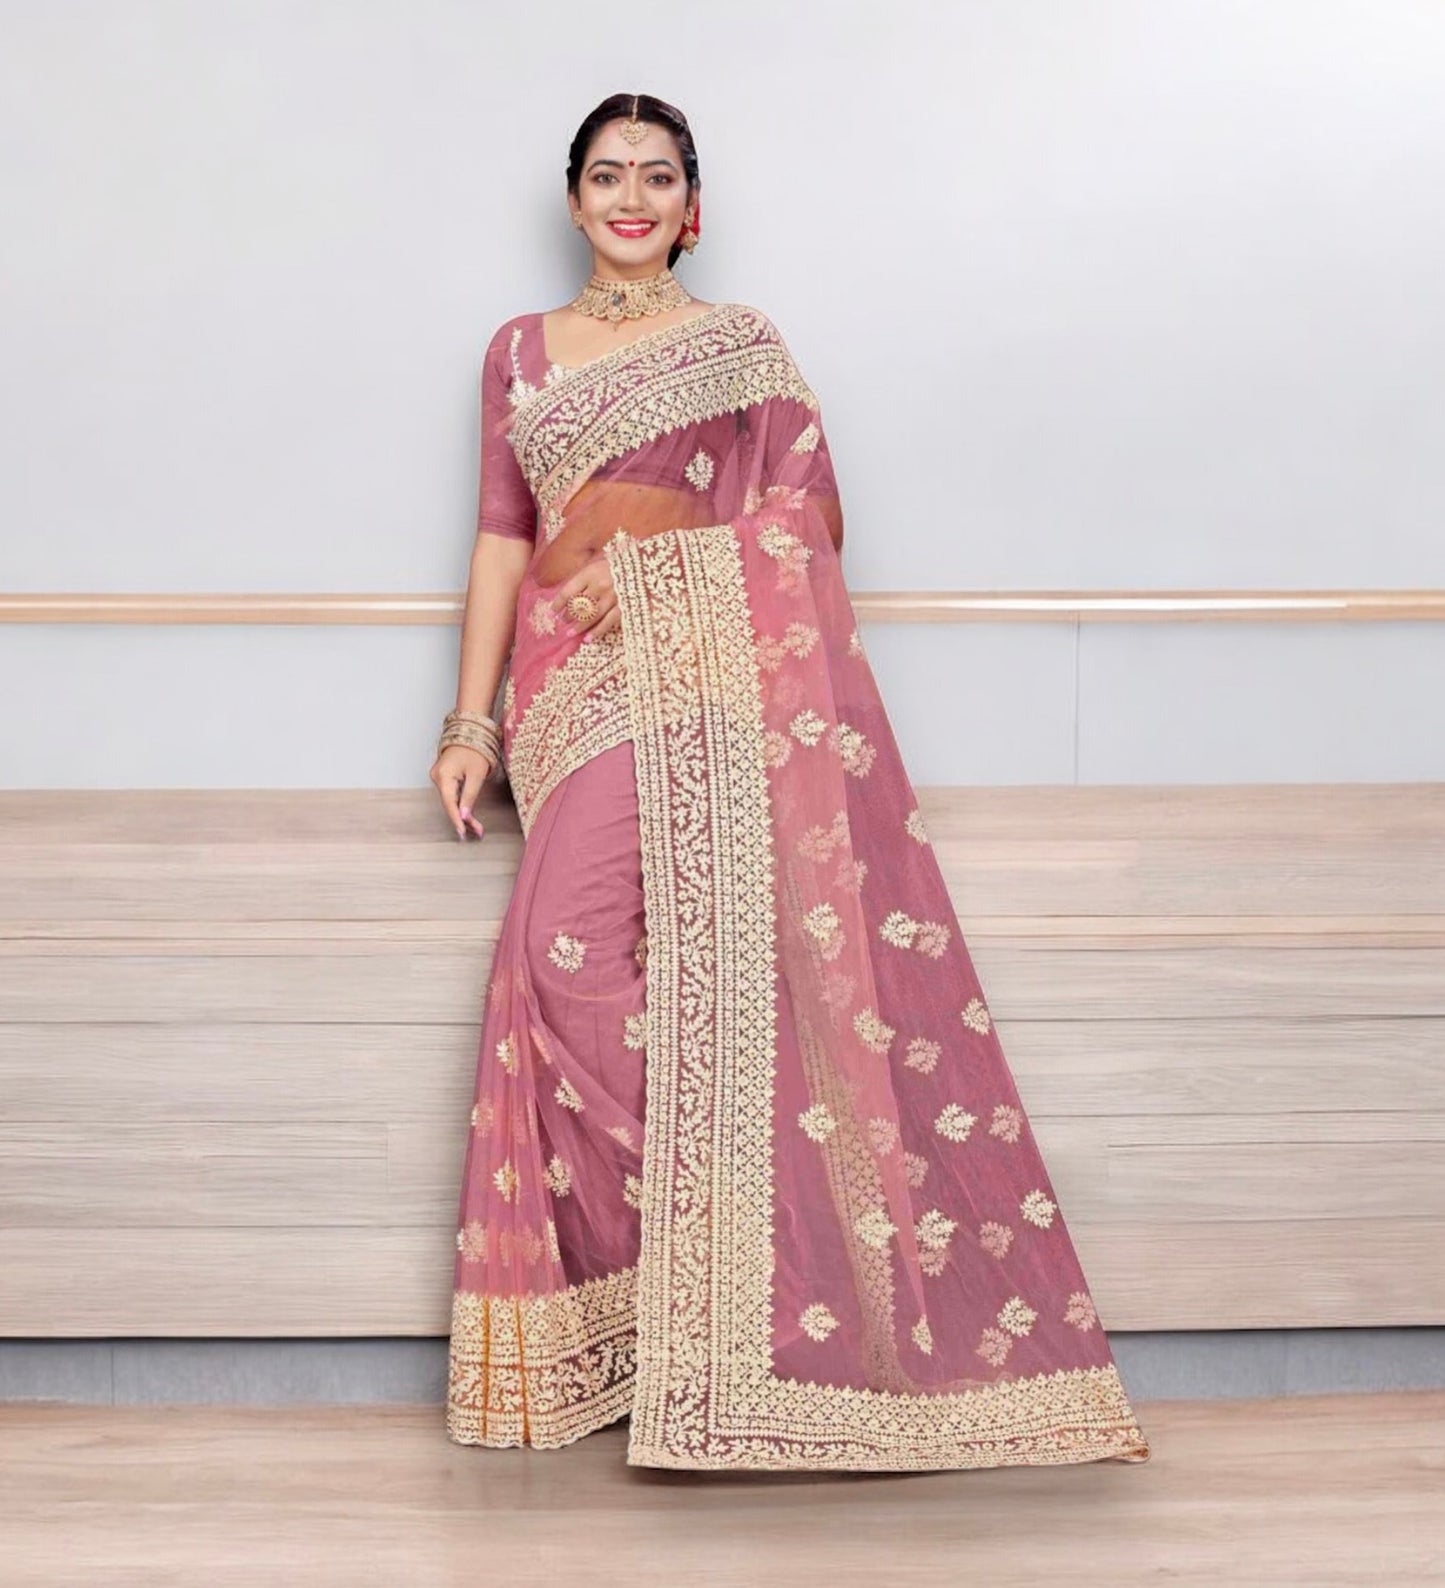 Enchanting Evening: Party Wear Net Saree with Intricate Embellishments